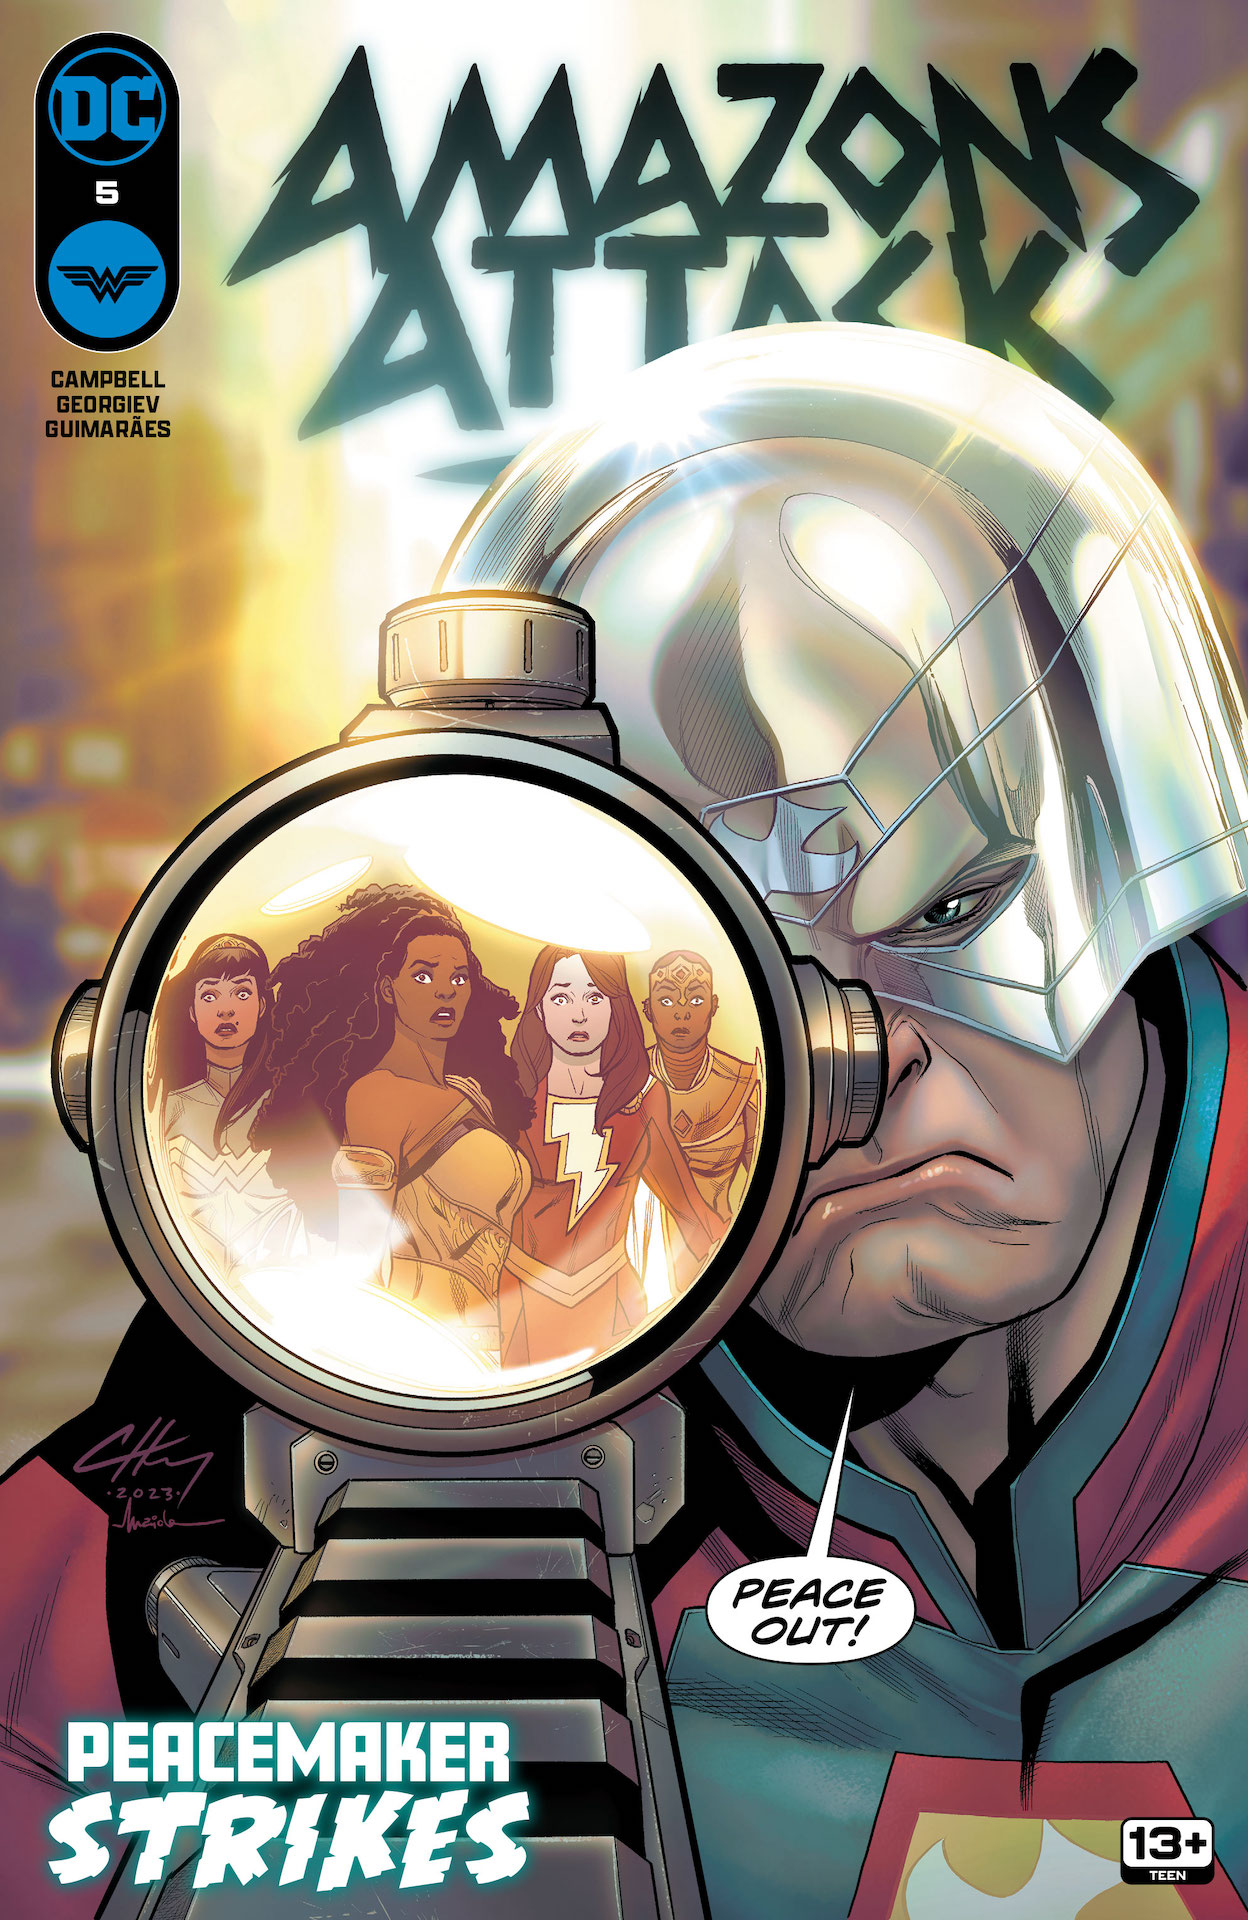 DC Preview: Amazons Attack #5